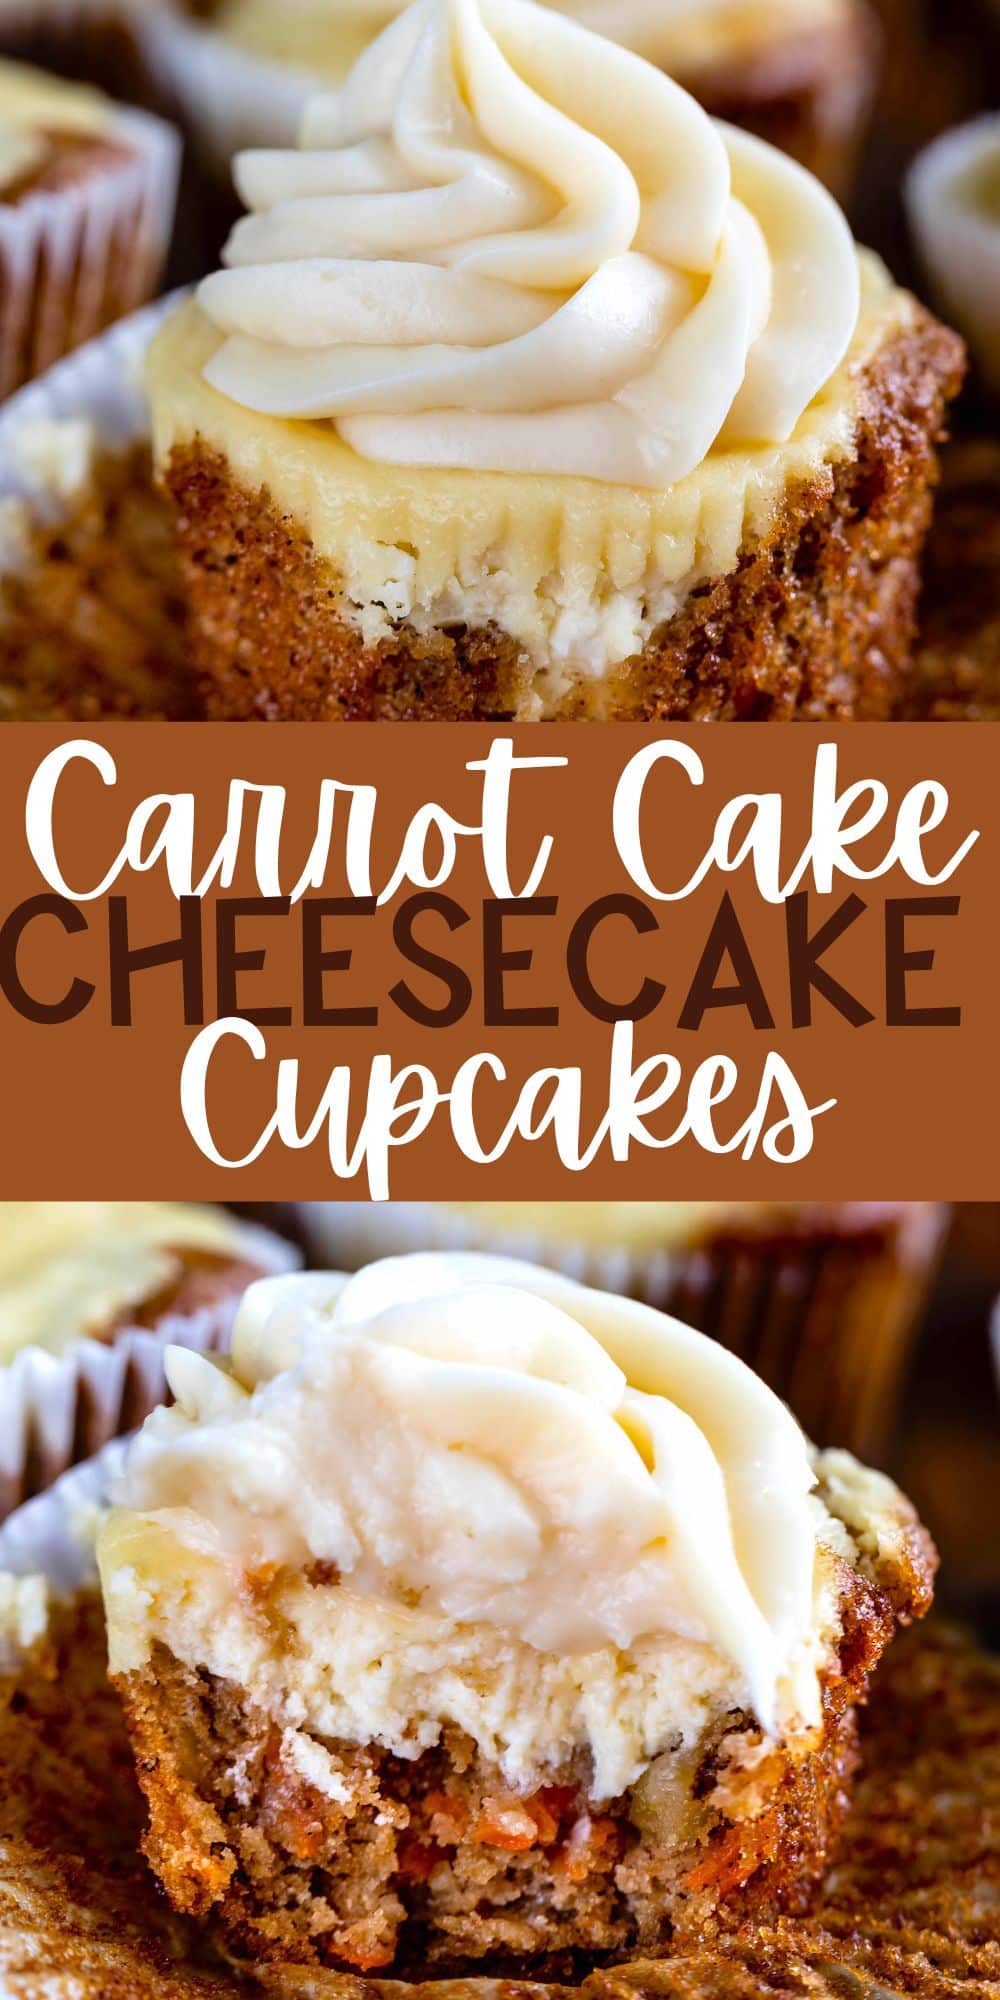 two photos of cupcakes with tan frosting on a cutting board with words on the image.